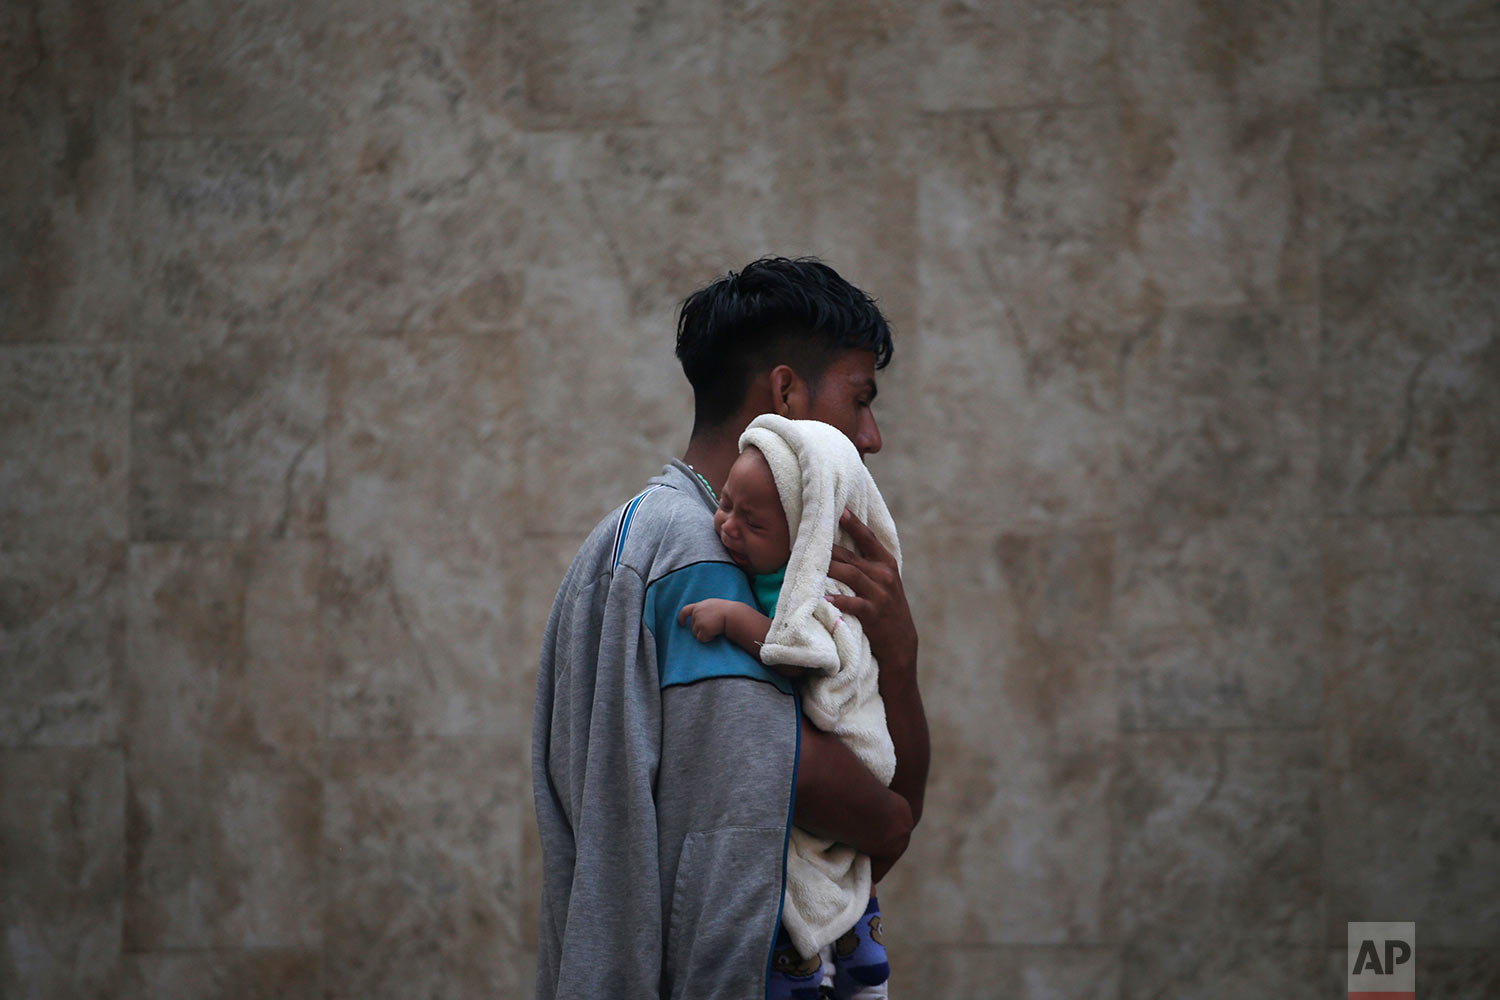  A Central American migrant making their way to the U.S. in a large caravan carries his son after arriving in Tapachula, Mexico, Sunday, Oct. 21, 2018. (AP Photo/Moises Castillo) 